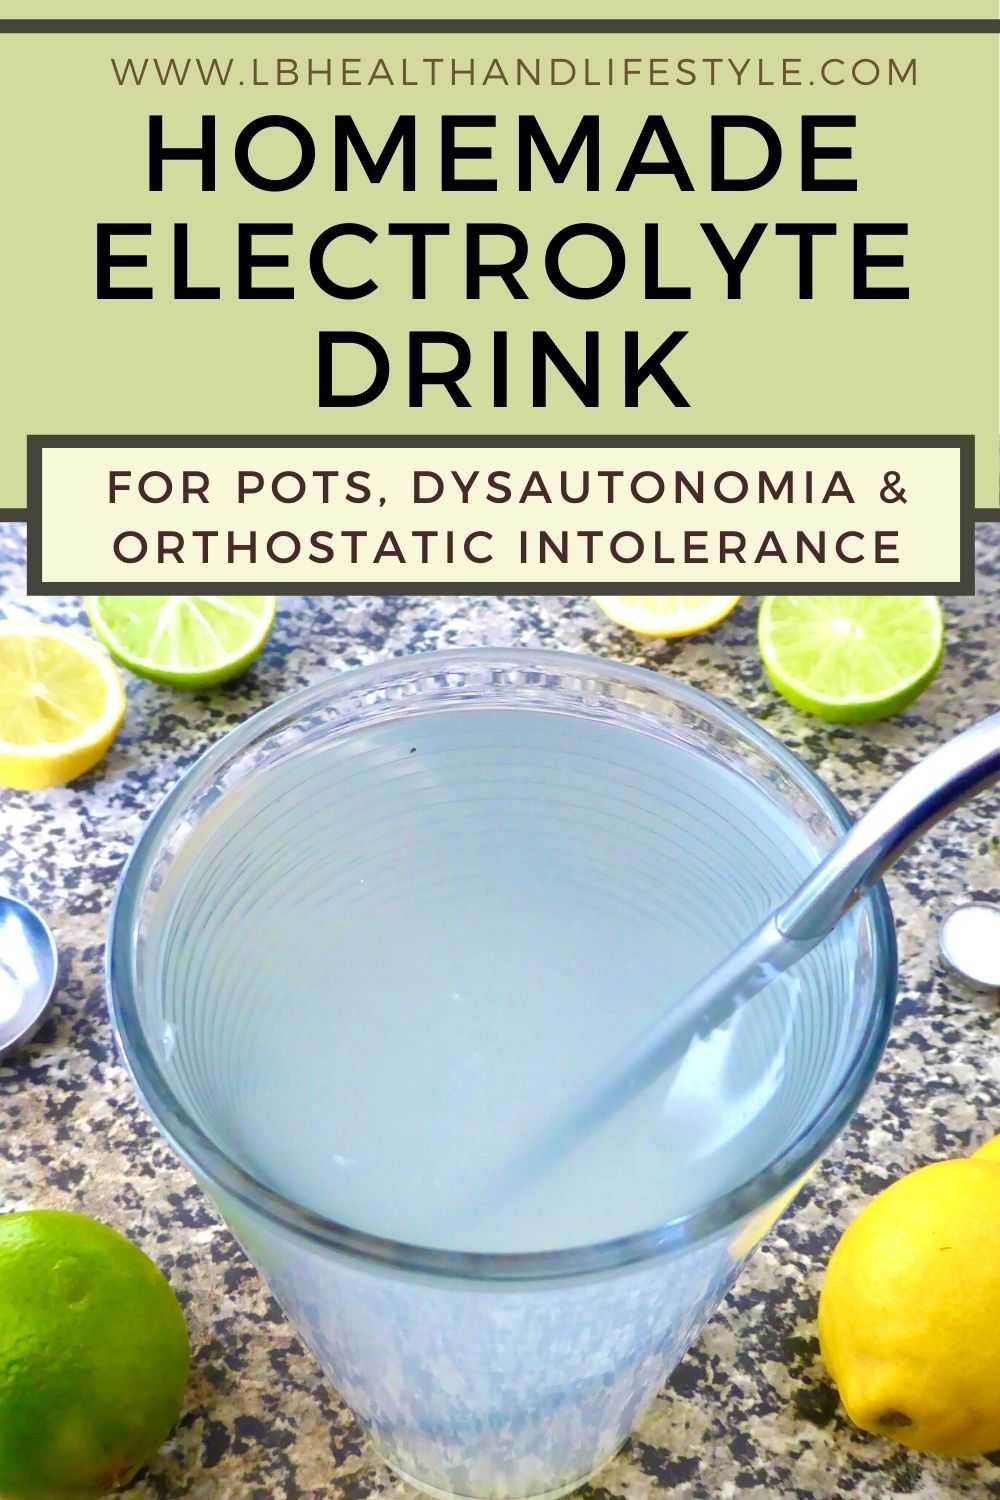 homemade electrolyte drink for pots dysautonomia and orthostatic intolerance